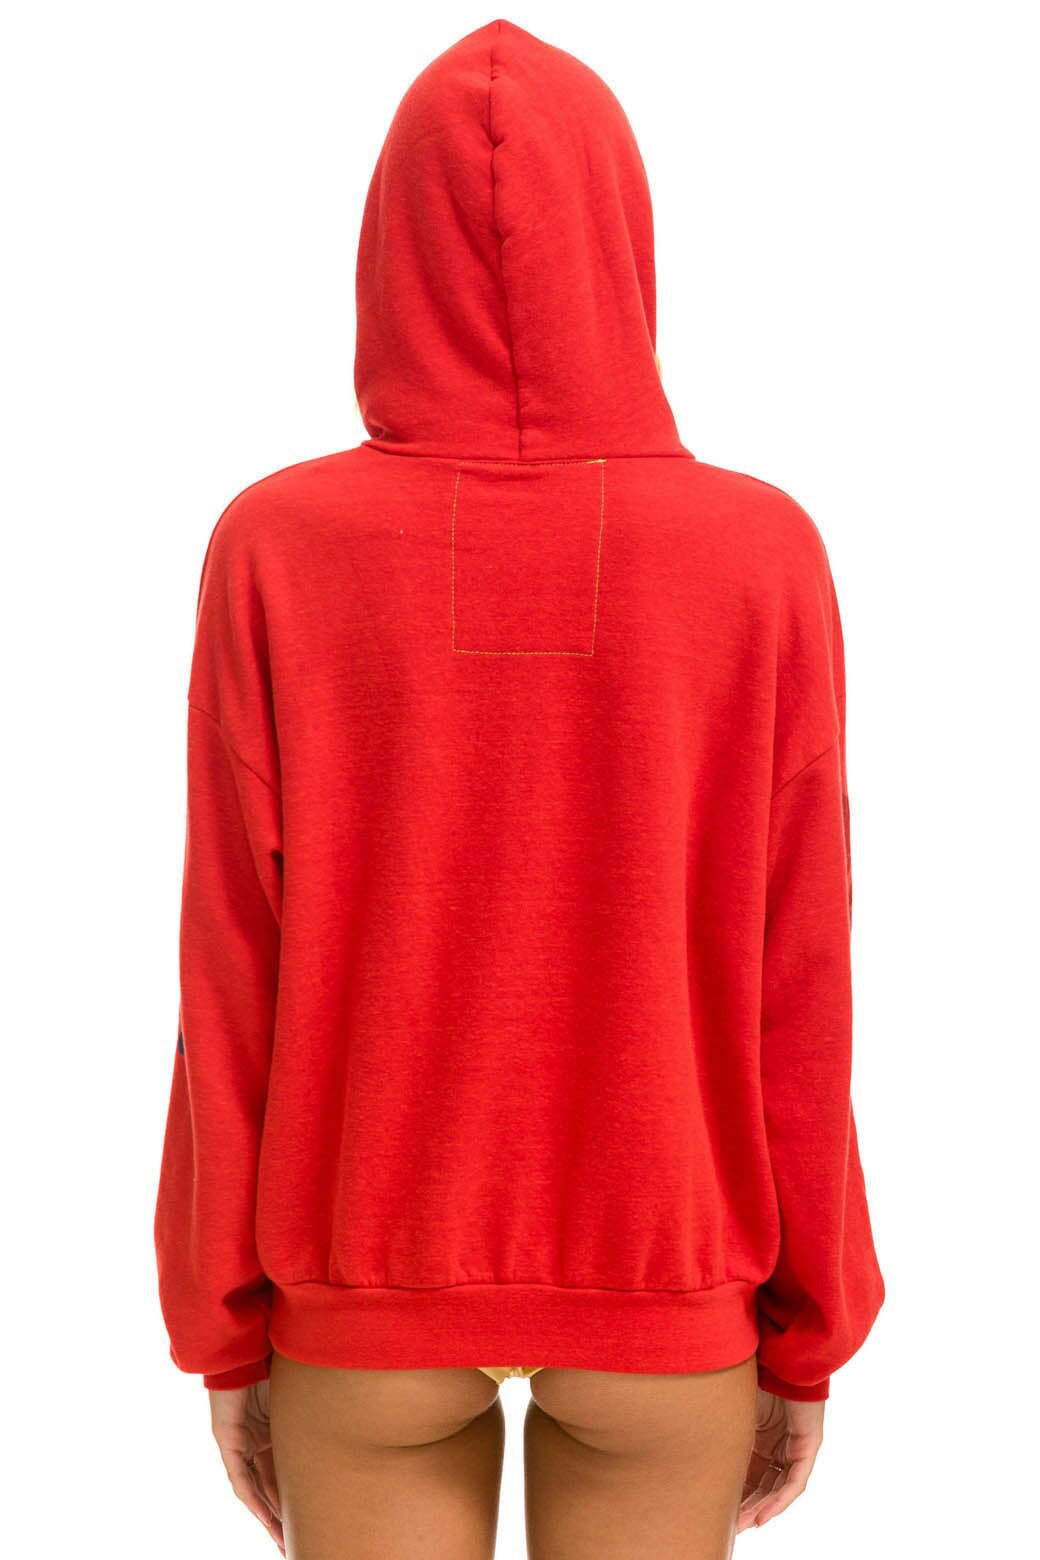 AVIATOR NATION MILL VALLEY RELAXED PULLOVER HOODIE - RED Hoodie Aviator Nation 